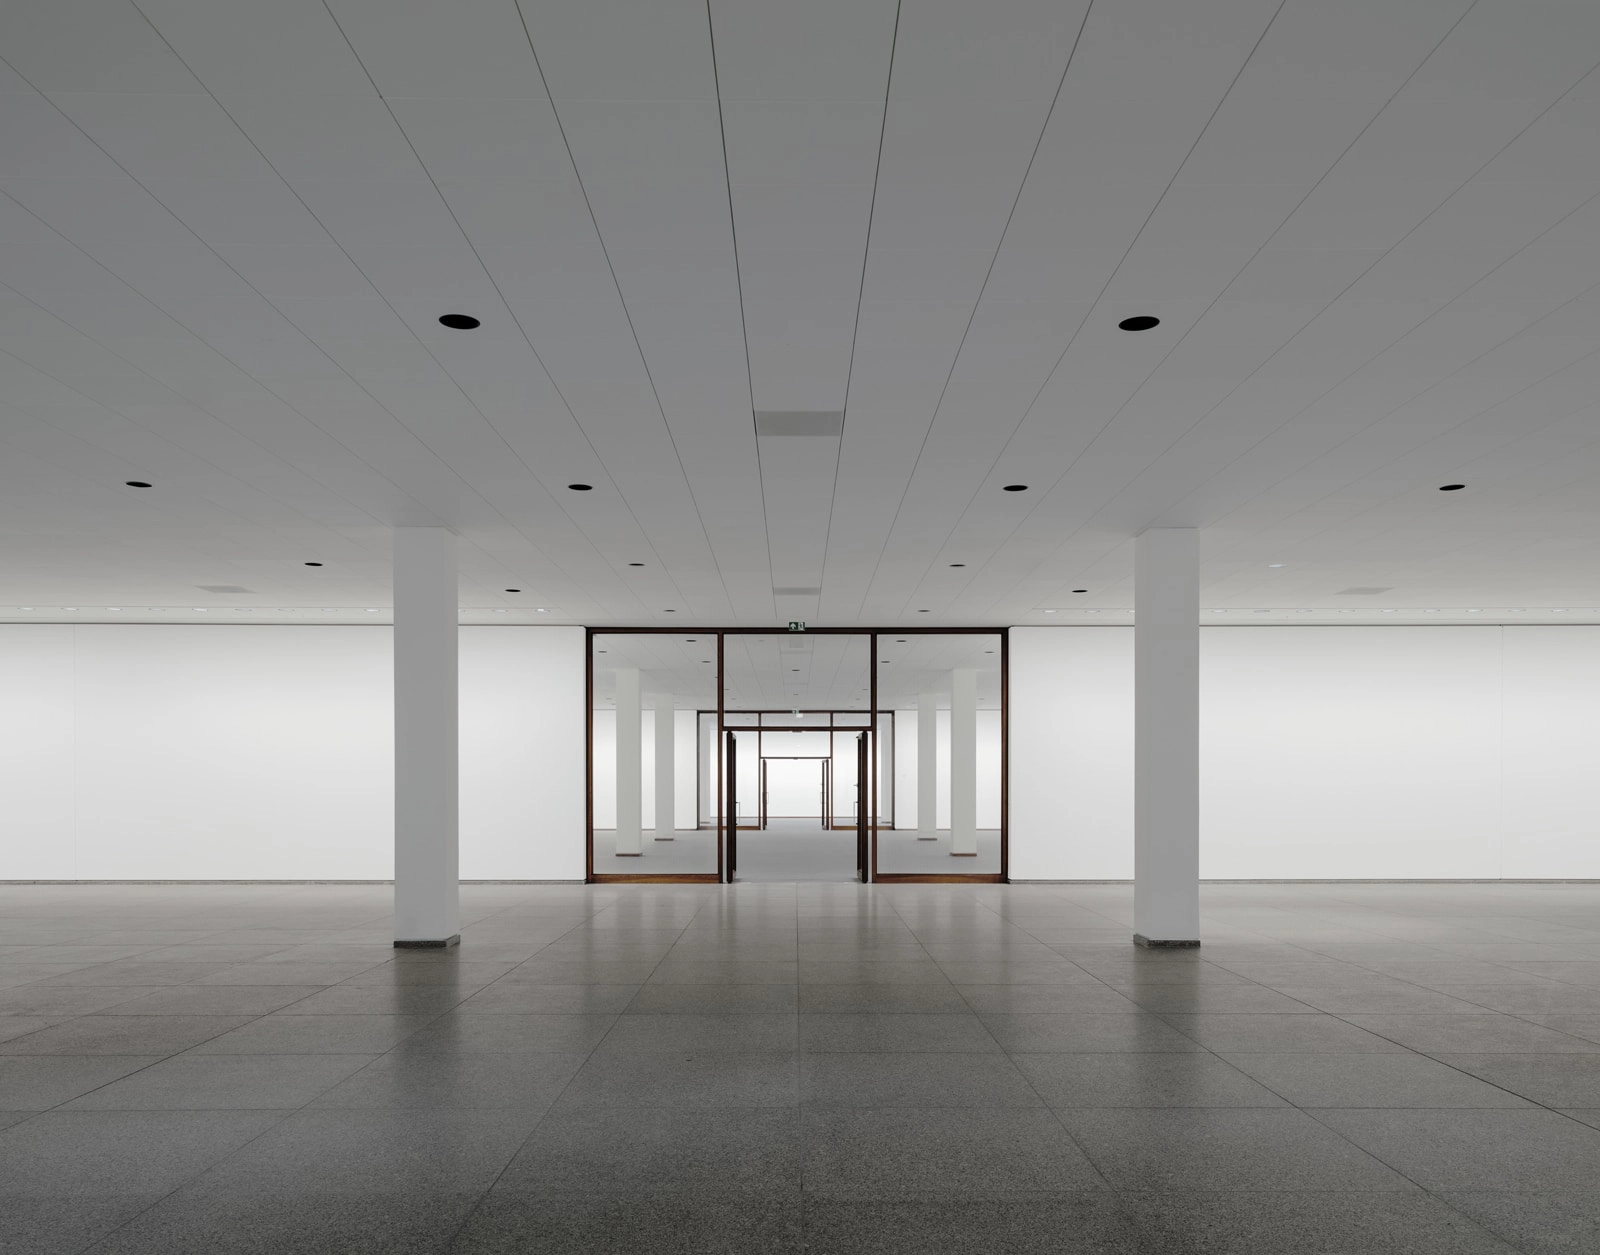 Image of 20210625 Chipperfield NeueNationalgalerieRefurbishment 10 in Neue Nationalgalerie Refurbishment - Cosentino